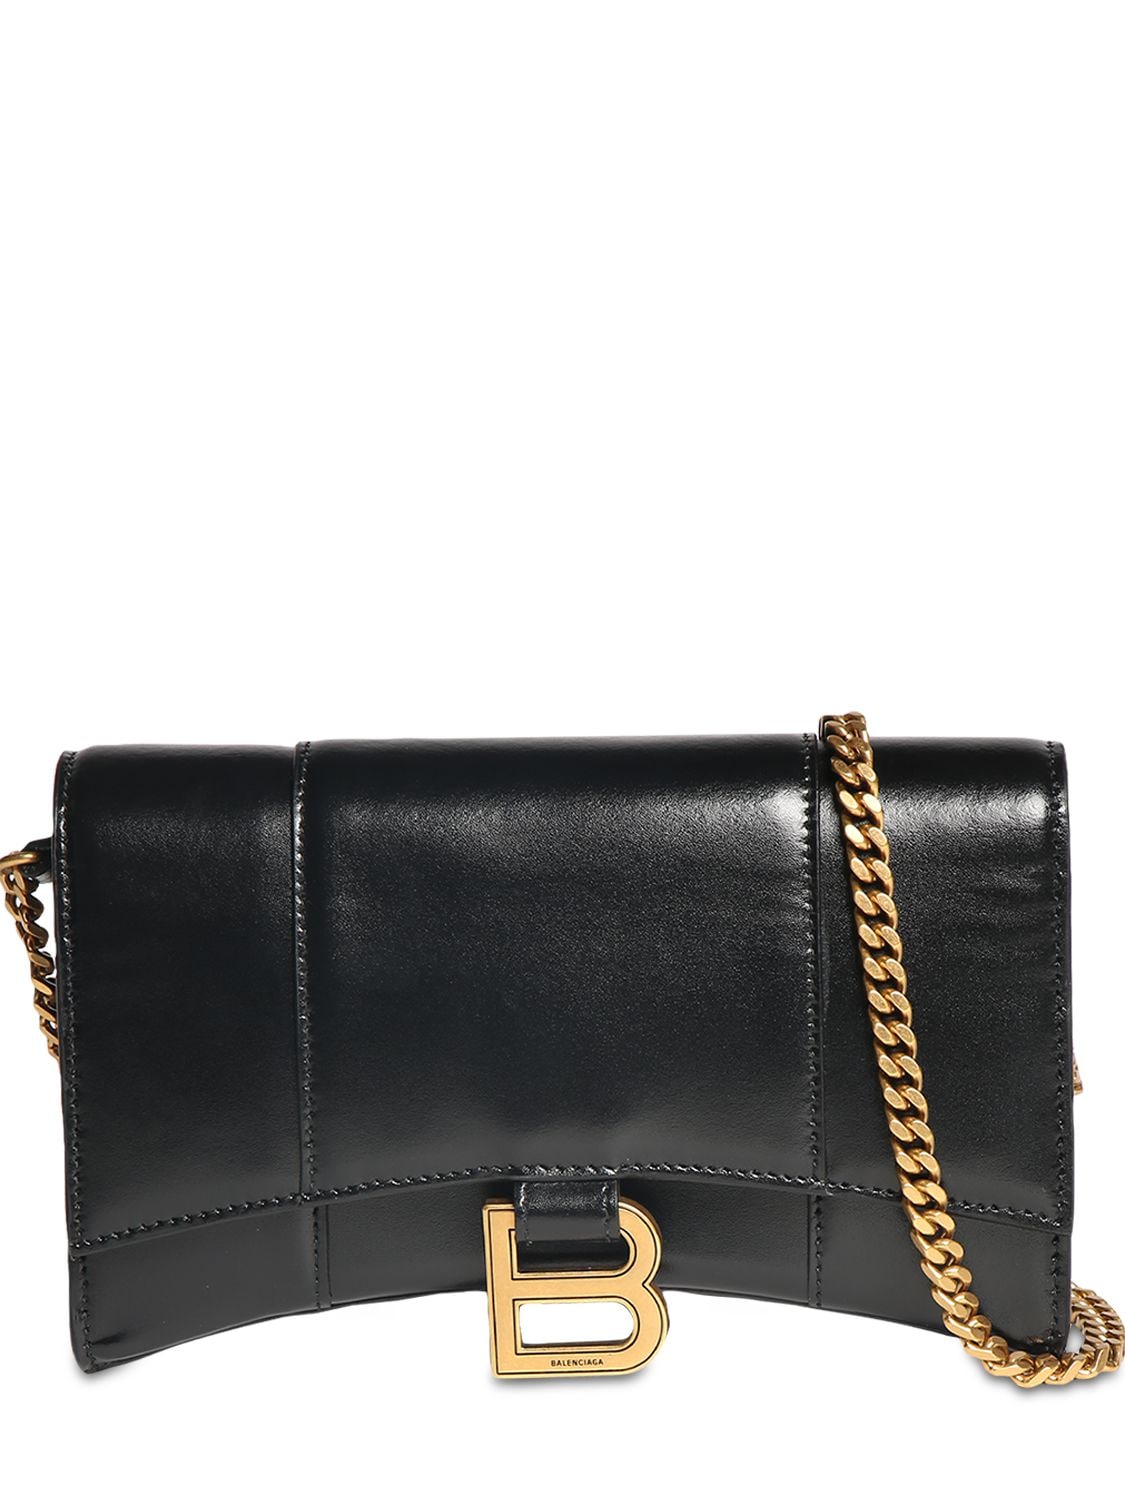 Balenciaga Hourglass Chain Leather Wallet On Chain In Noir/gold | ModeSens